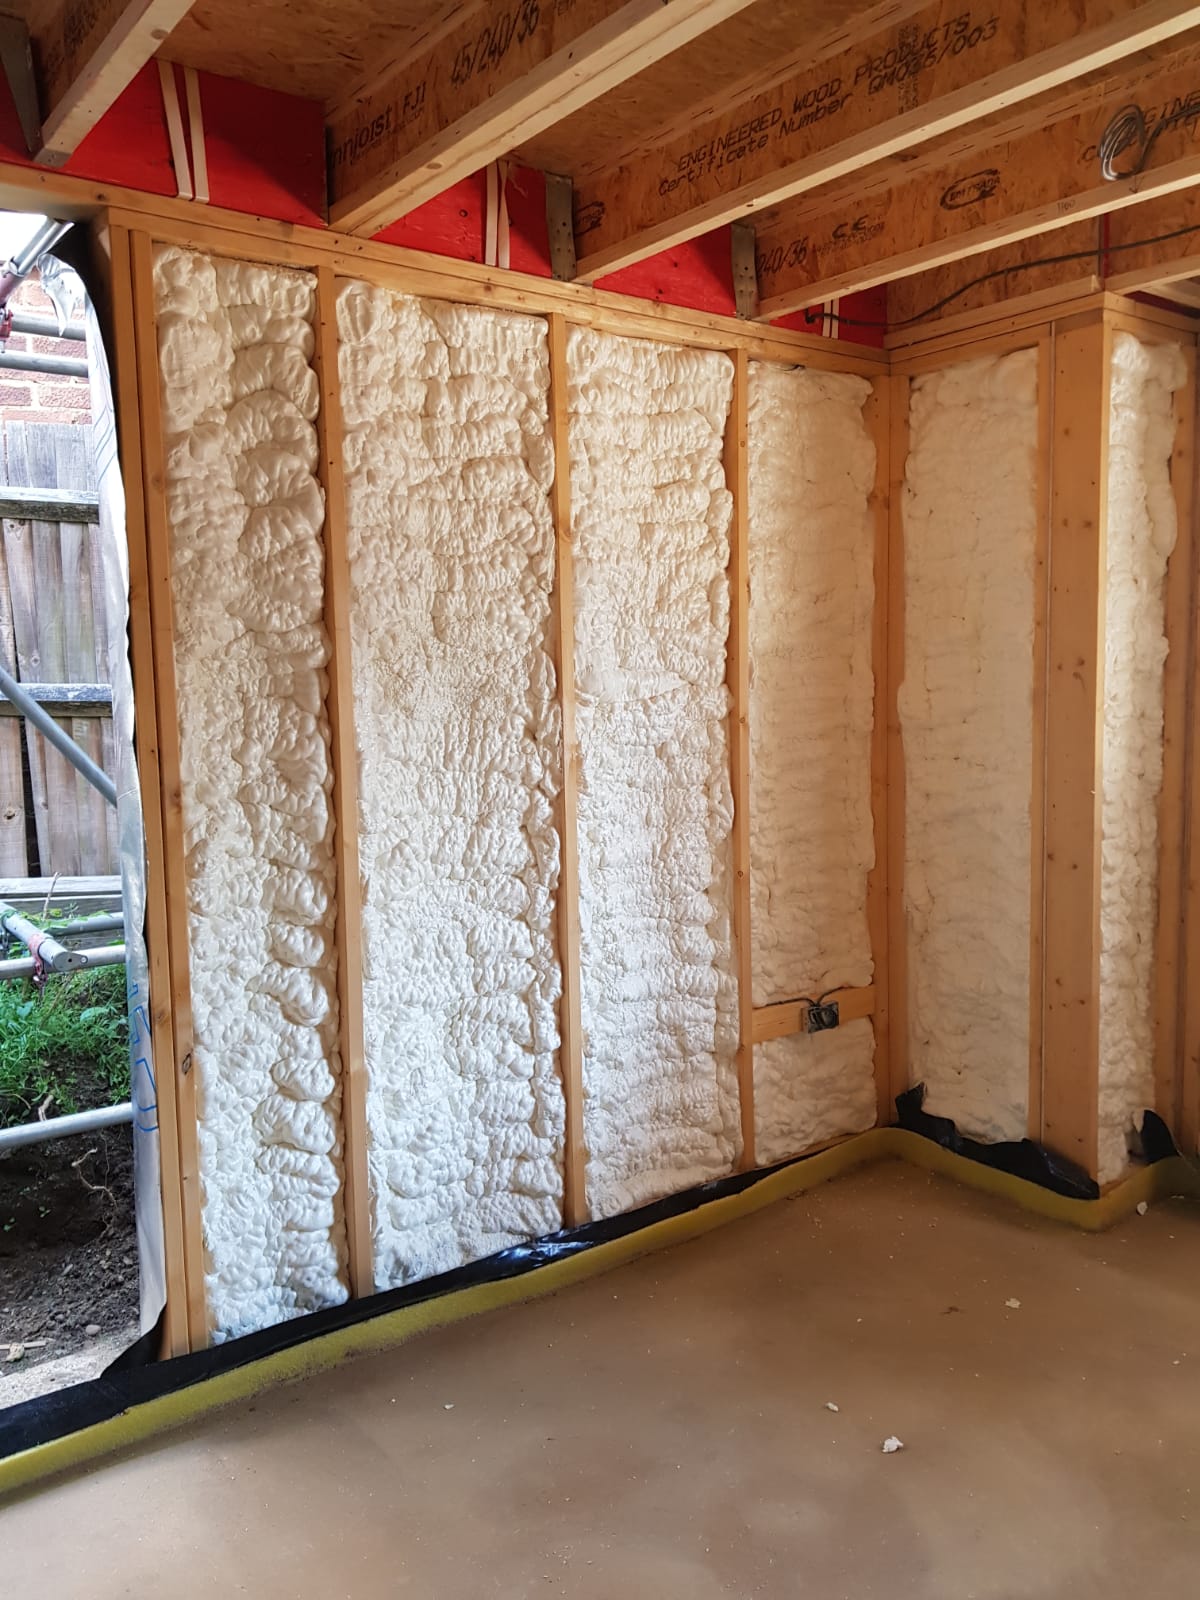 How to Install Spray Foam Insulation in a Wall